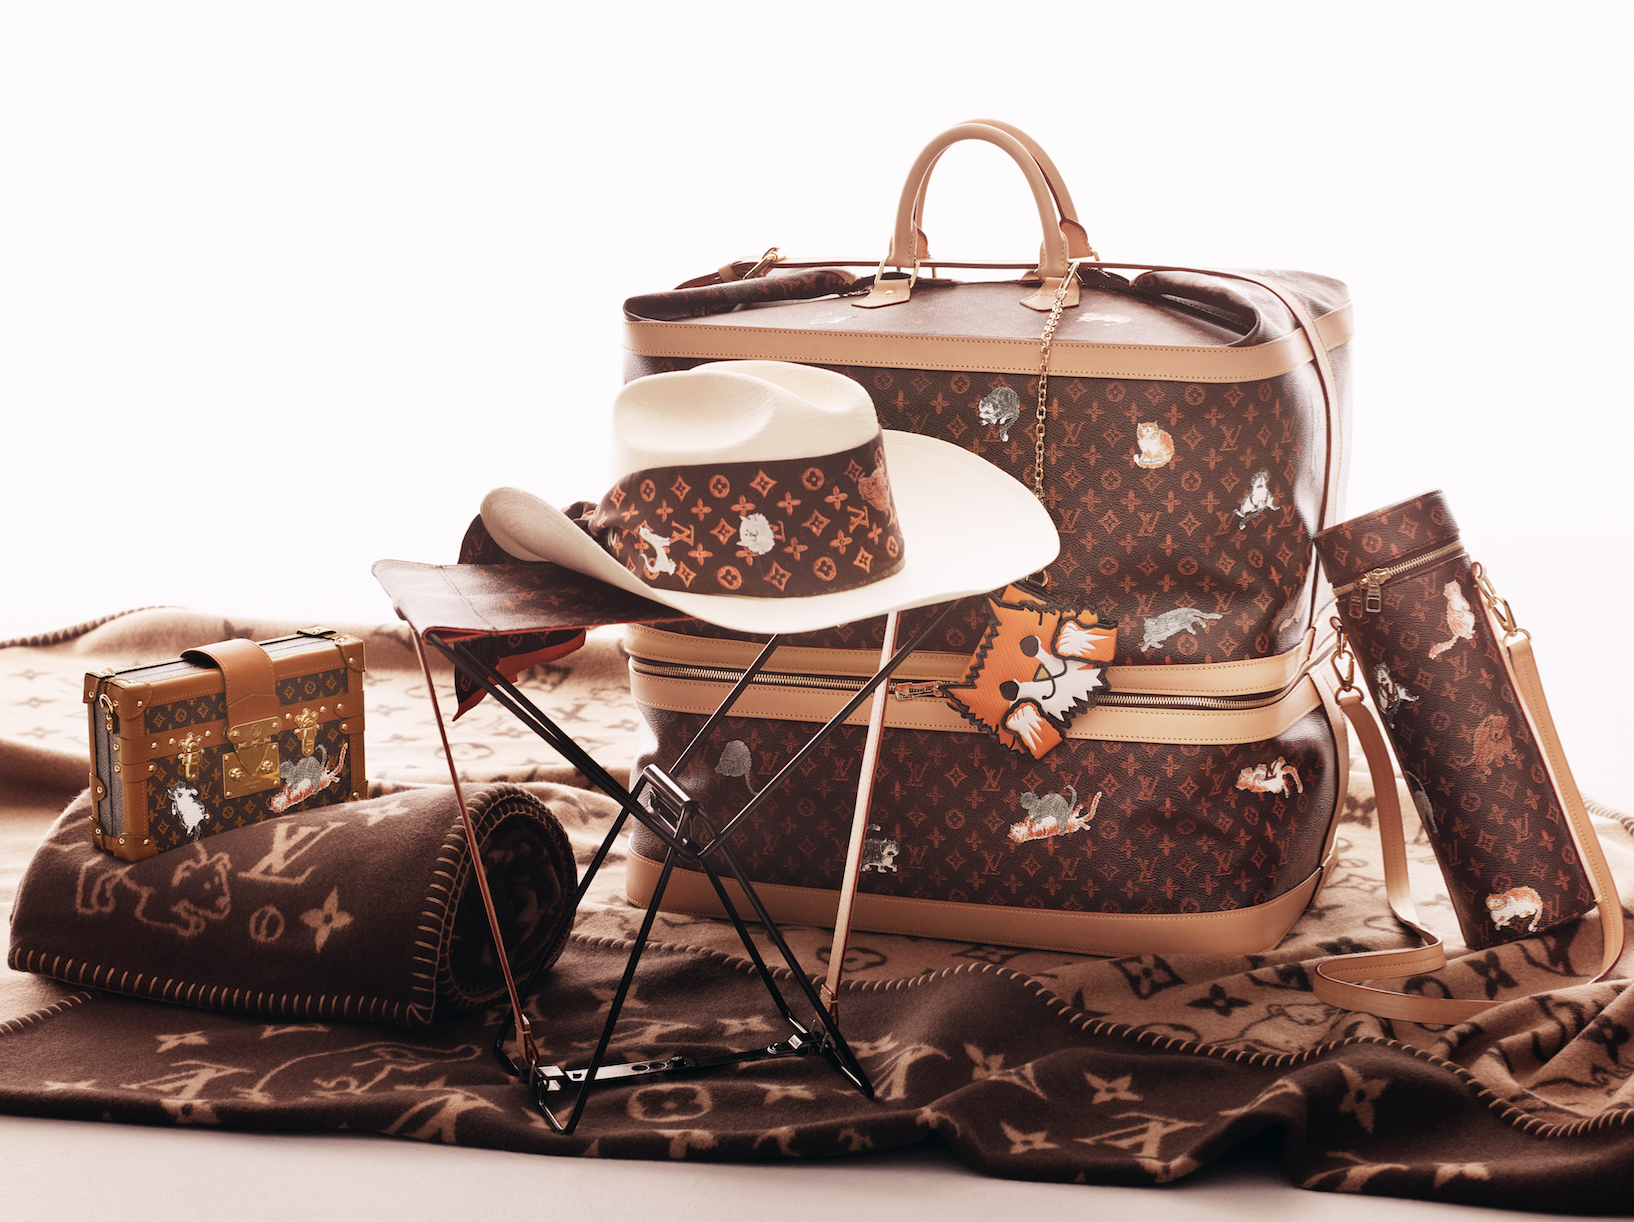 Louis Vuitton Puppies on the Travel, Champagne Frame